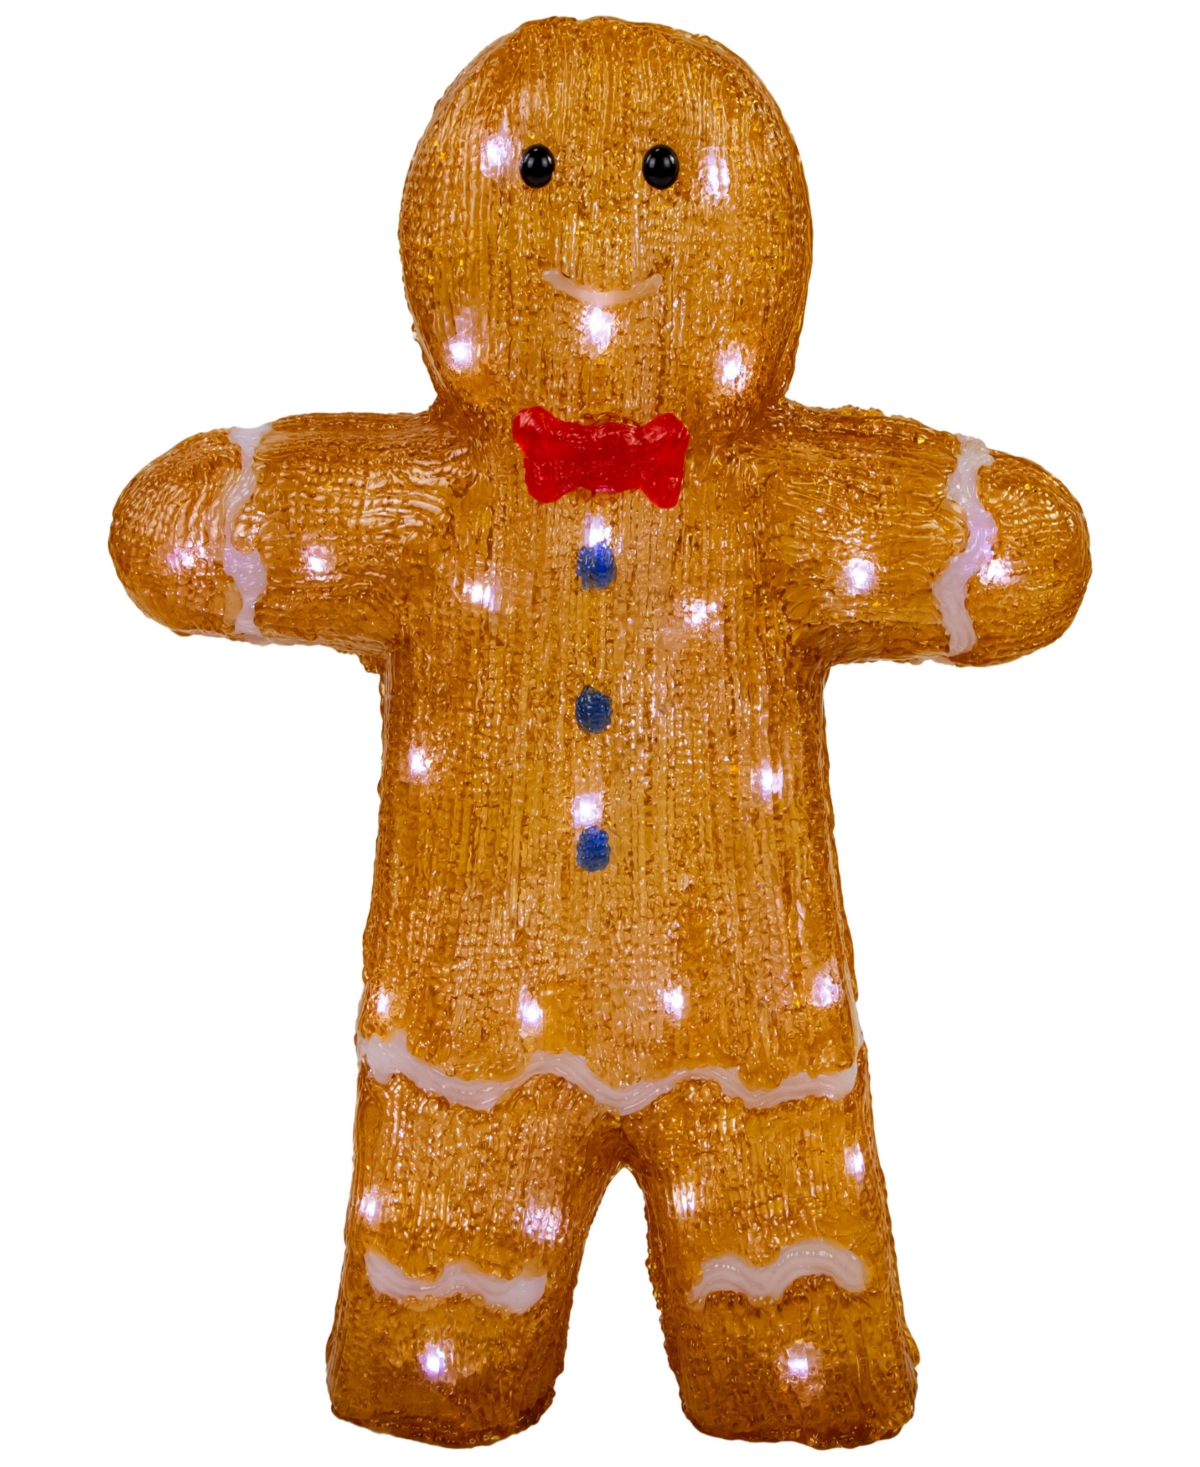 Northlight 16" Light Emitting Diode (led) Lighted Acrylic Gingerbread Man With Bow Tie Christmas Decoration In Brown